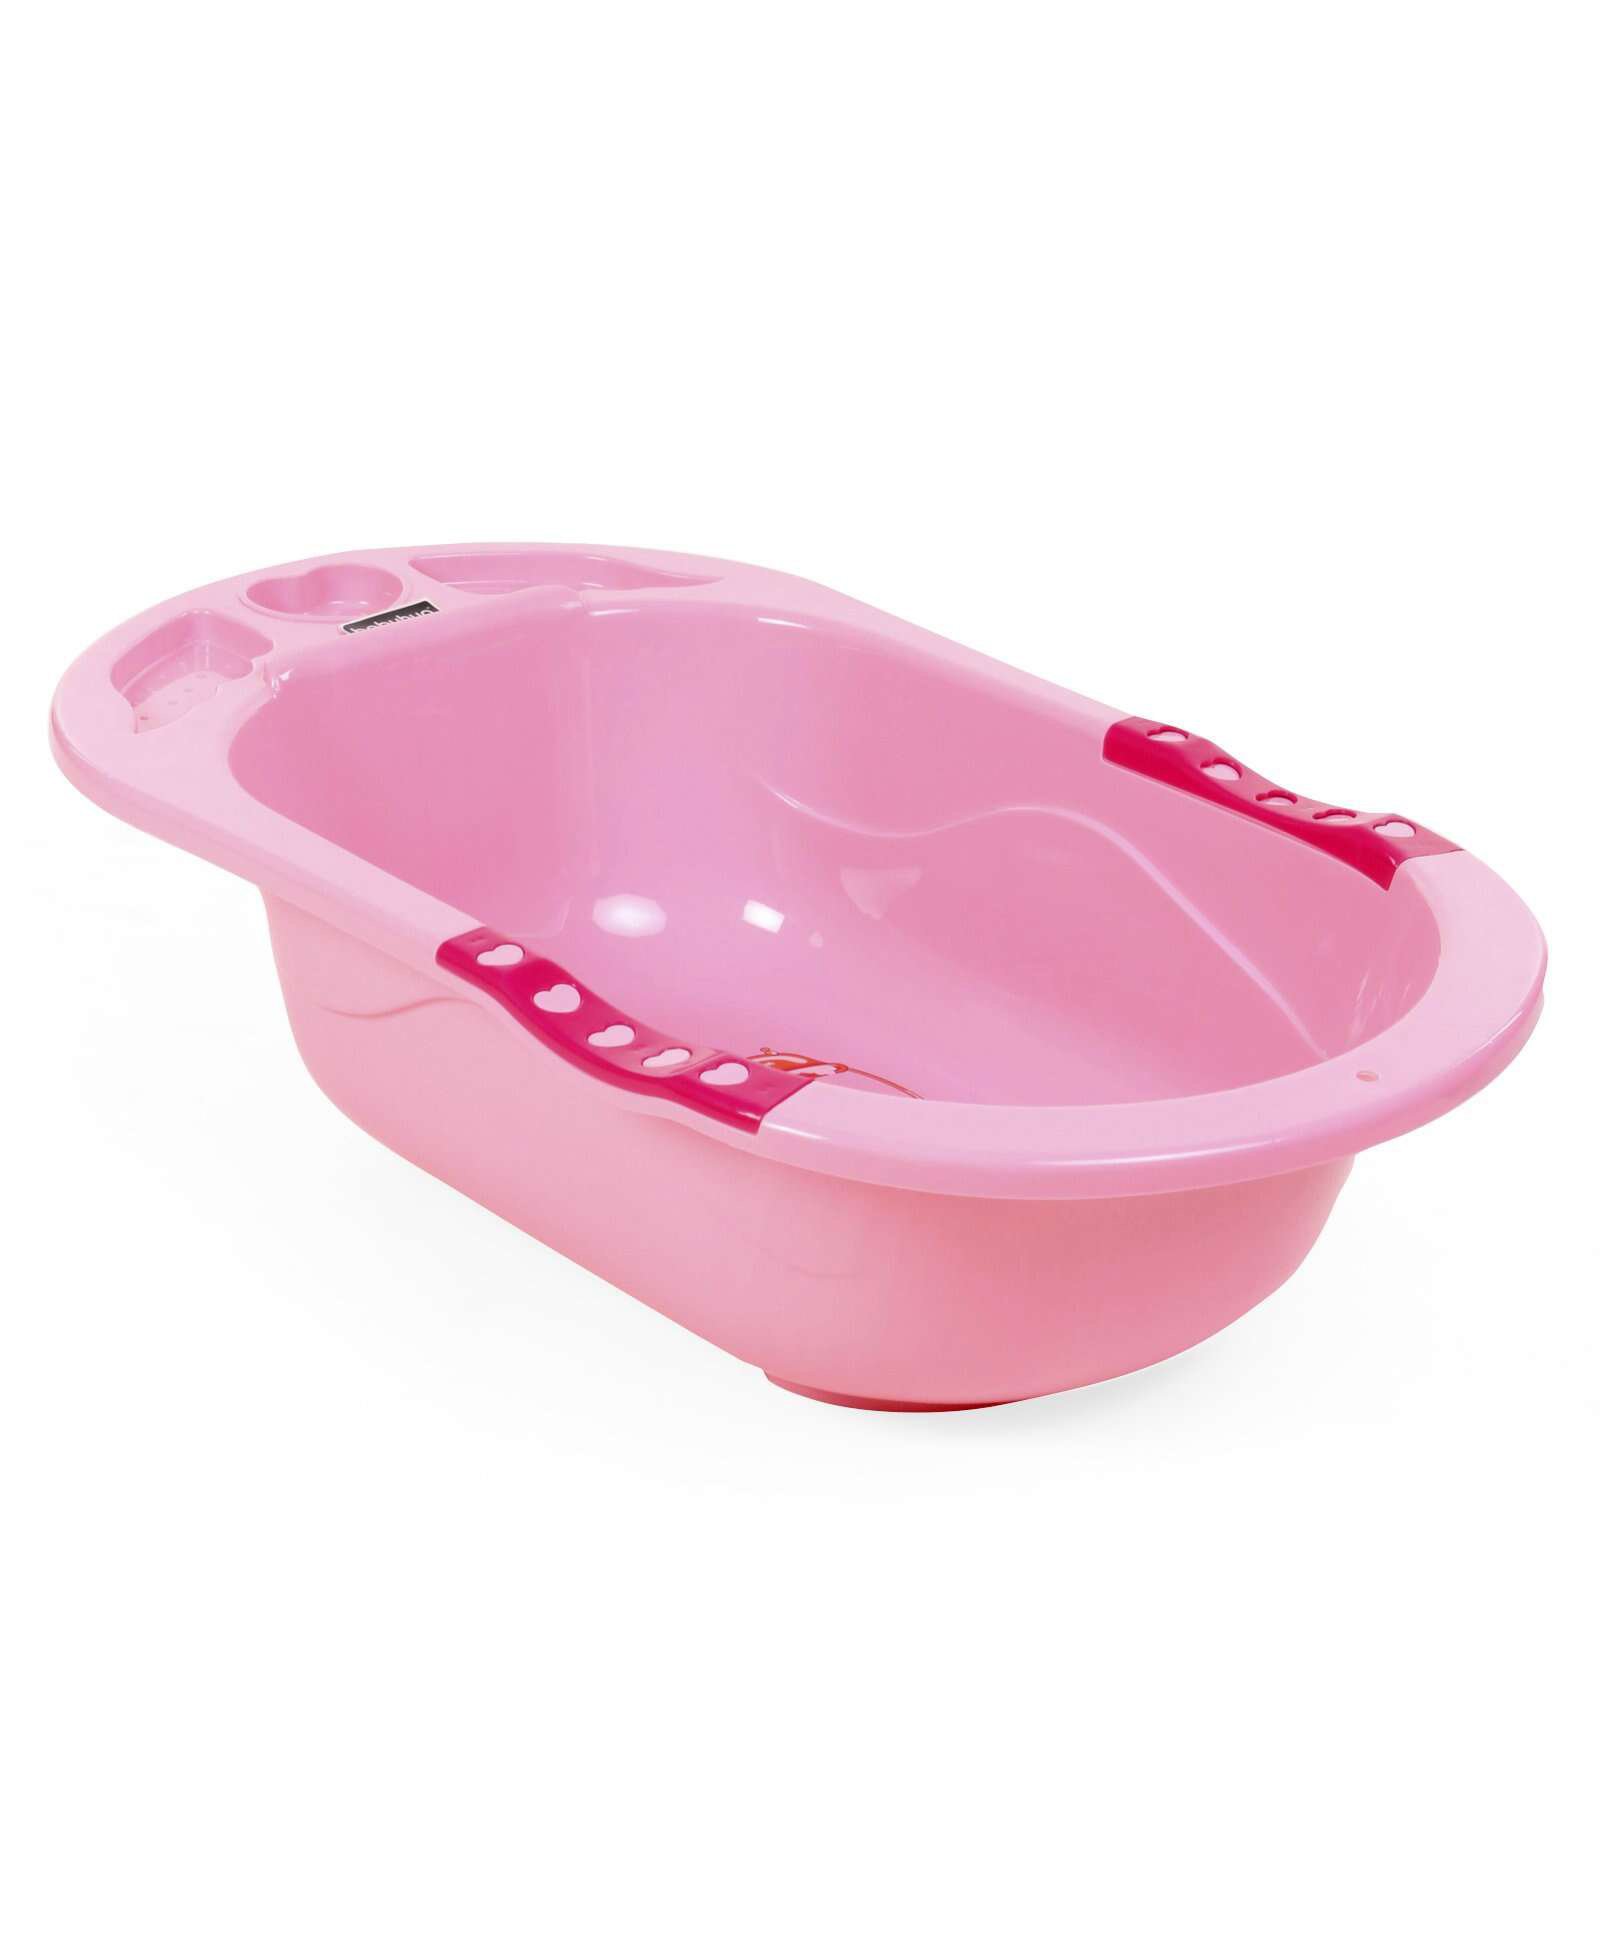 Babyhug Large Baby Bath Tub Cartoon Print - Pink Online in India, Buy at  Best Price from  - 3058410